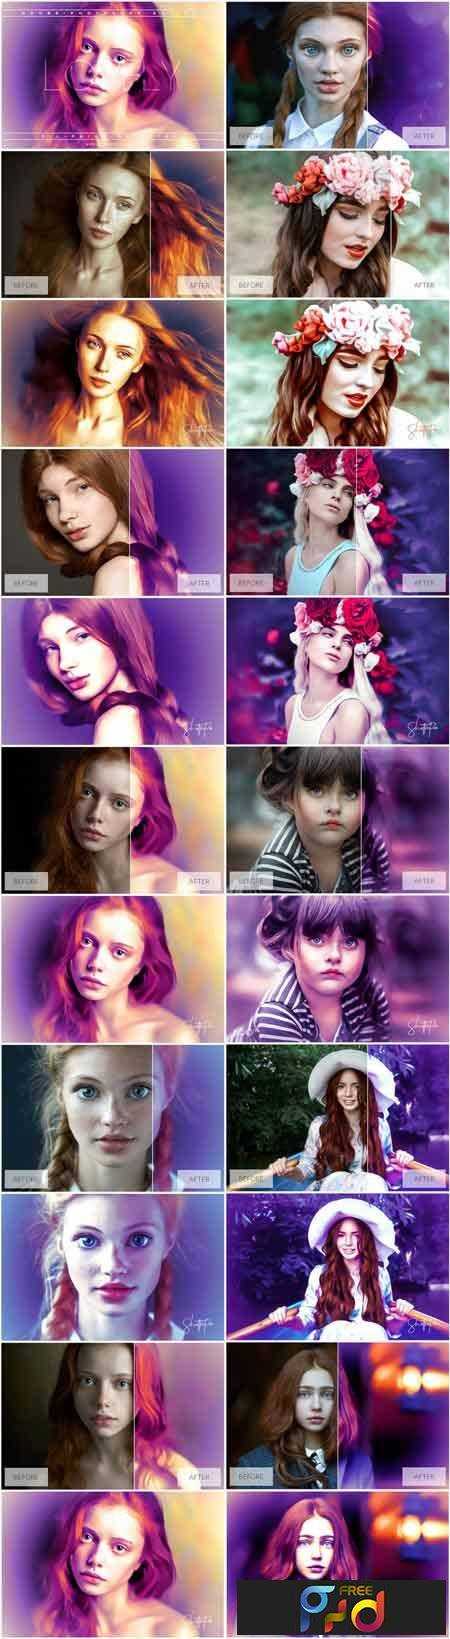 freepsdvn-com_1473608430_lovely-oil-painting-effect-actions-884892